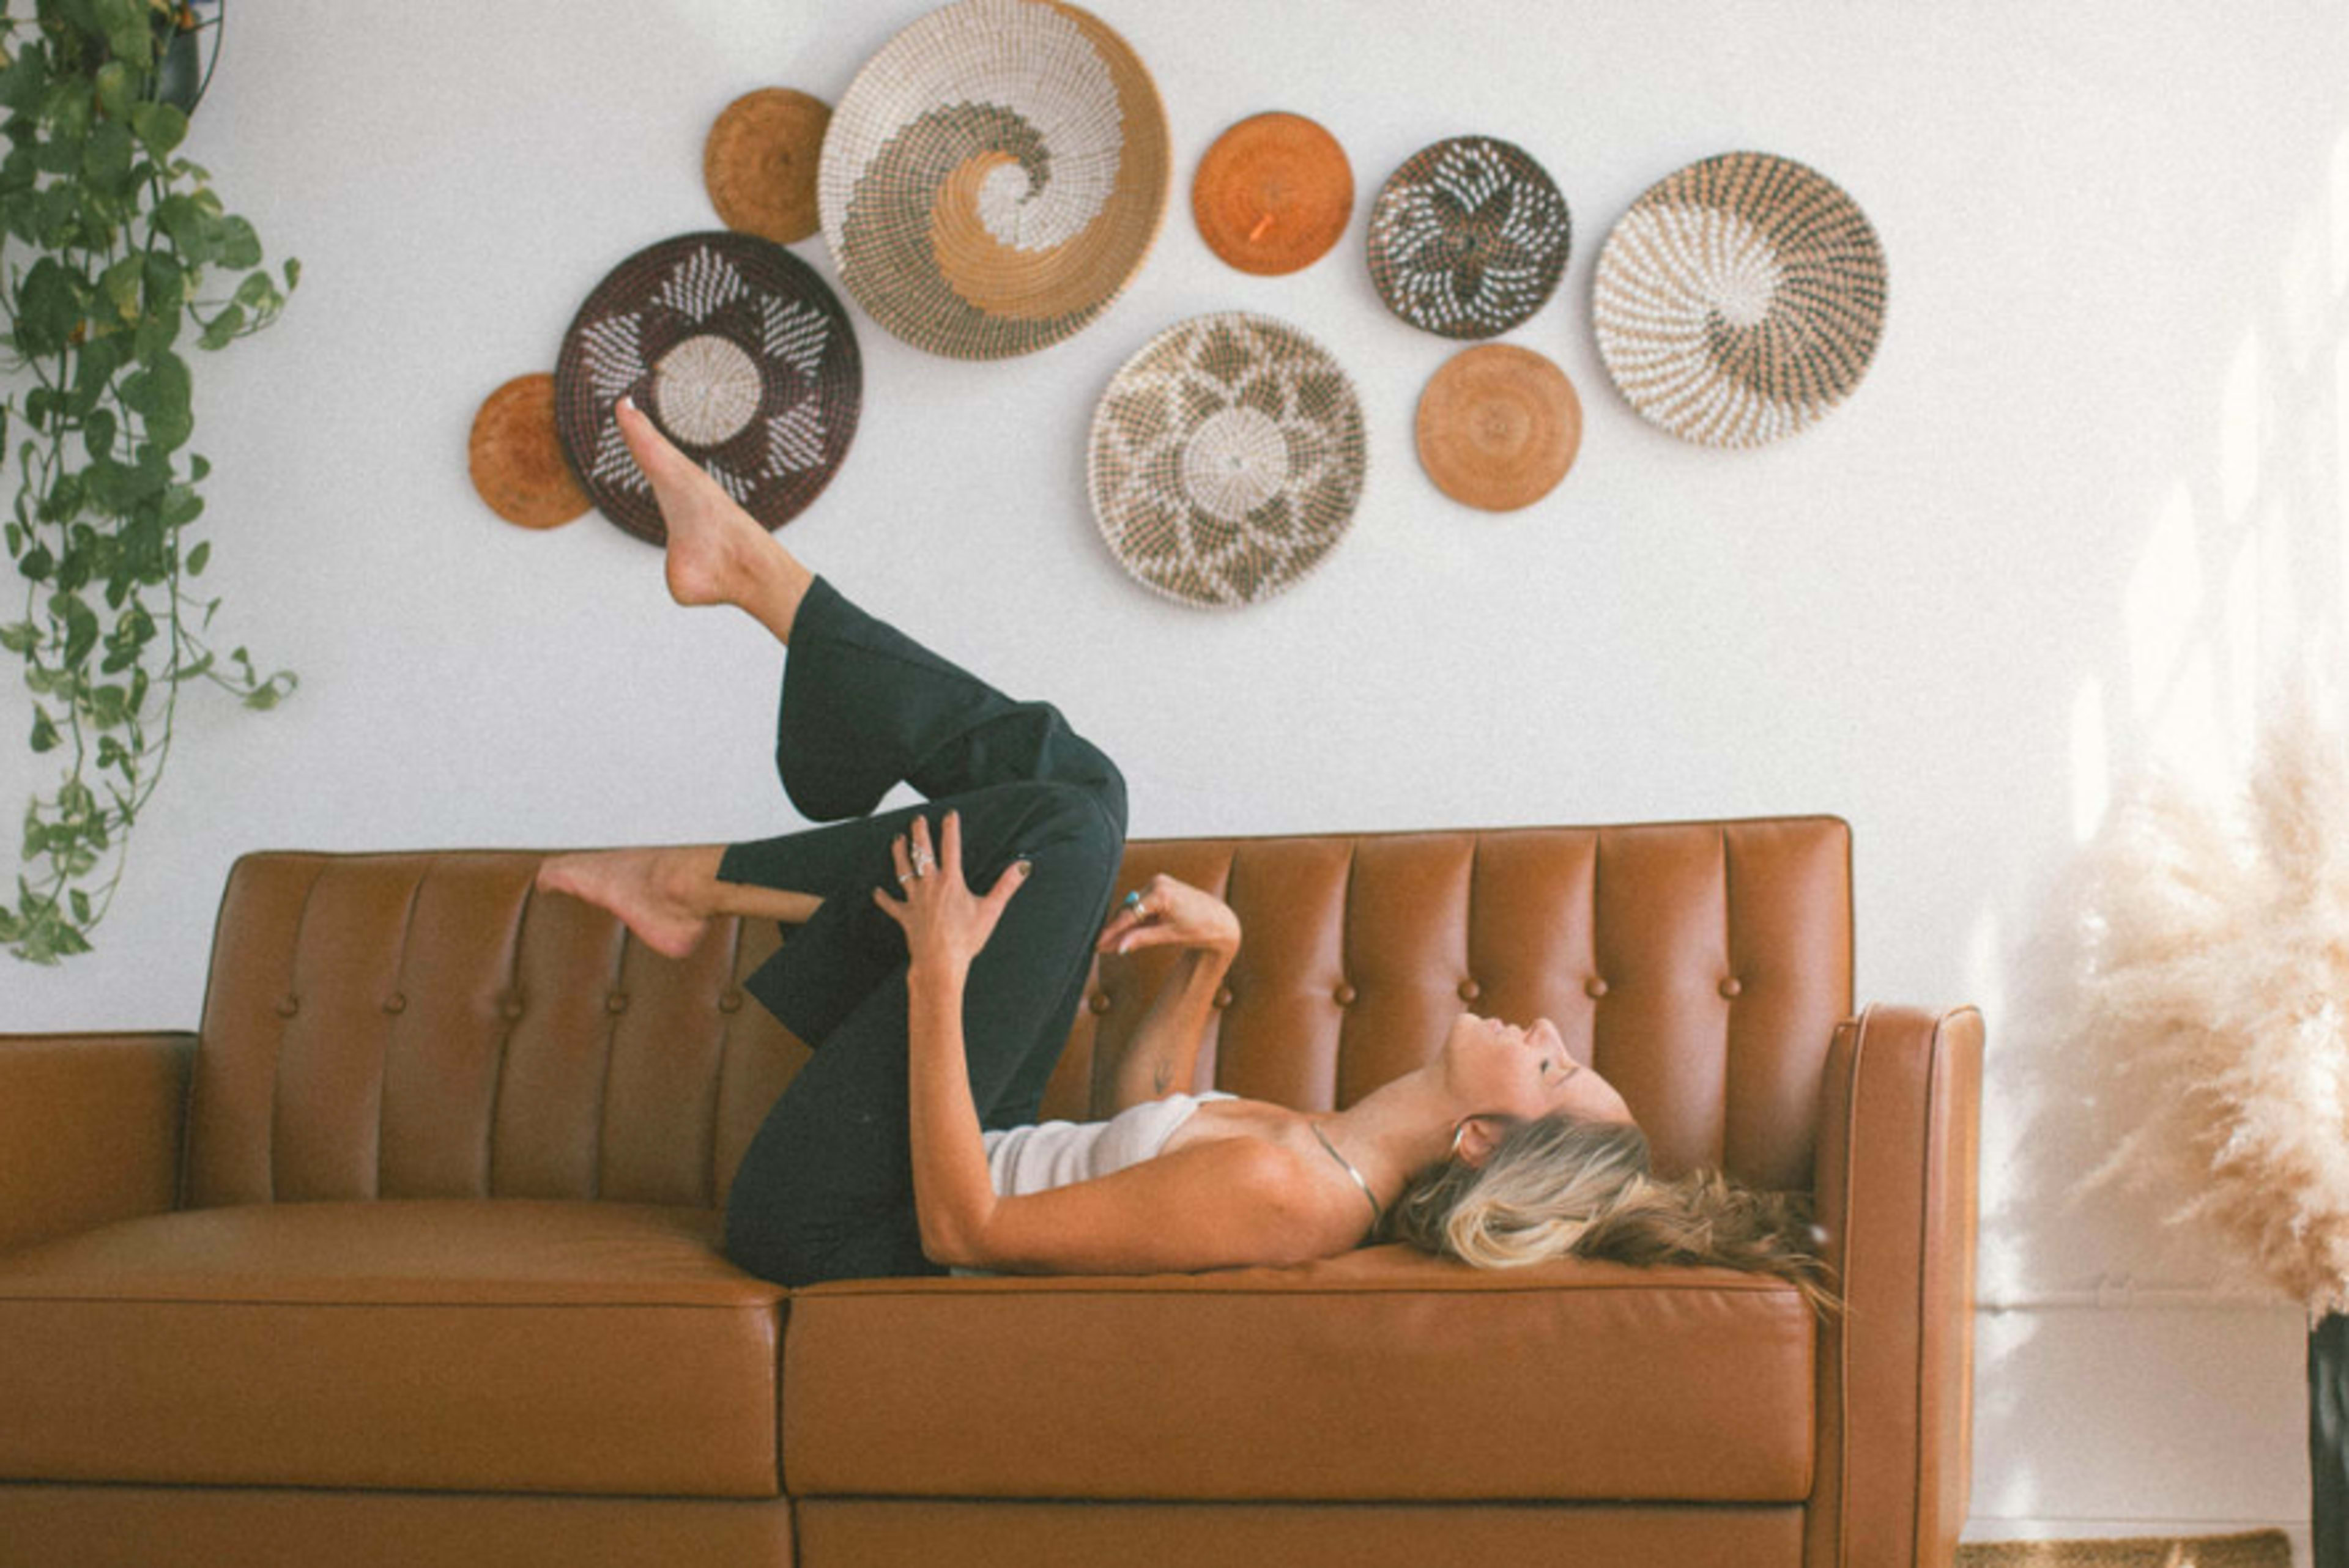 A boho photoshoot of a woman on a brown couch.